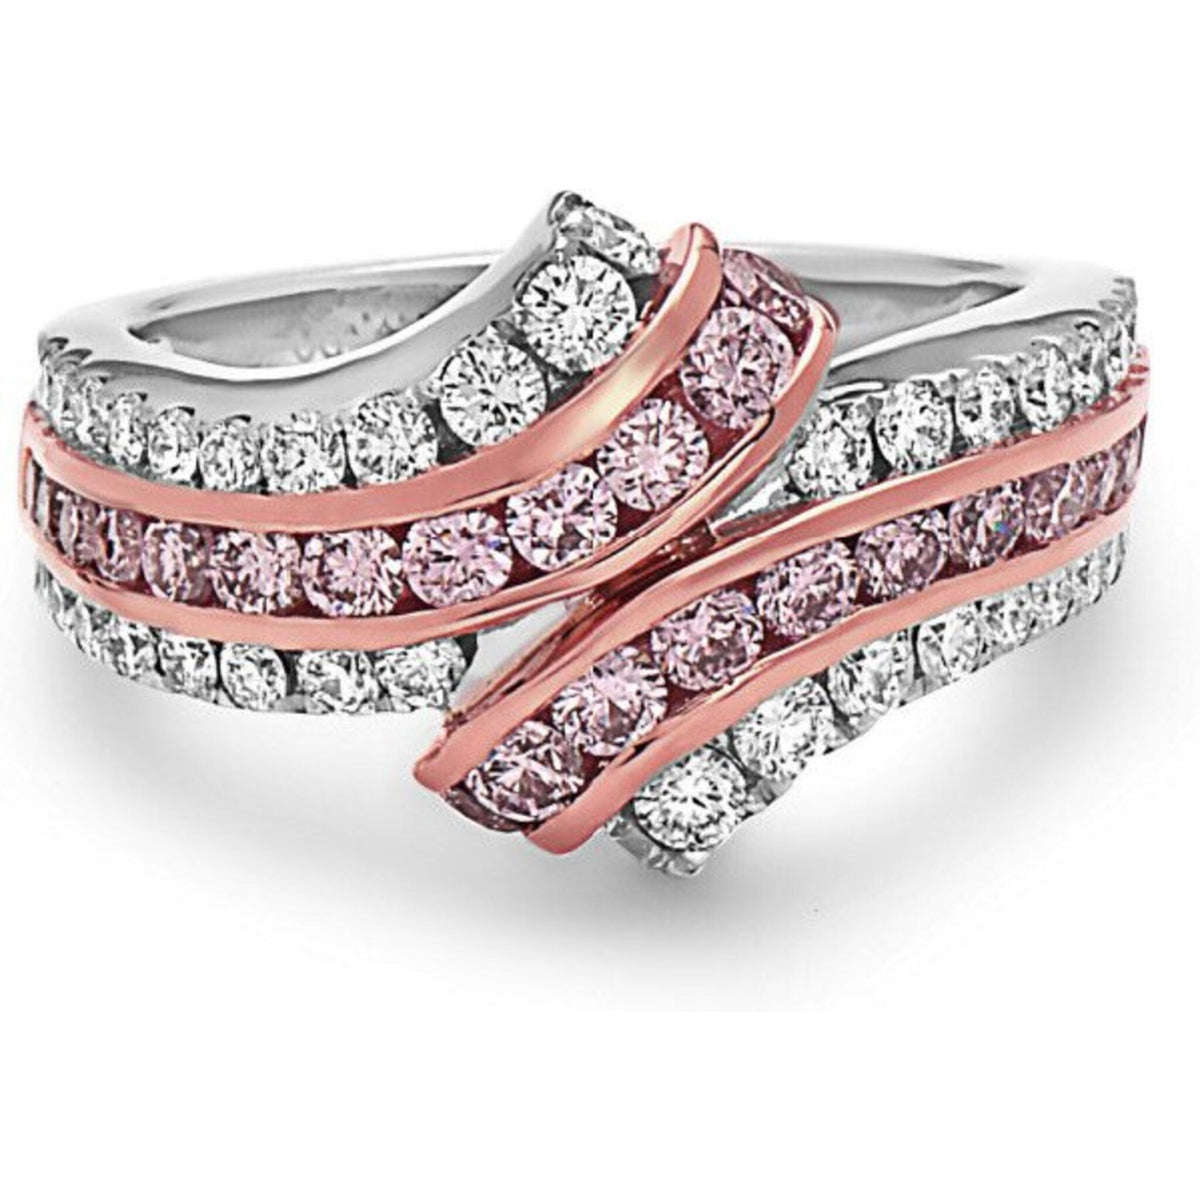 Elegant diamond bypass ring from the Charles Krypell Krypell Collection